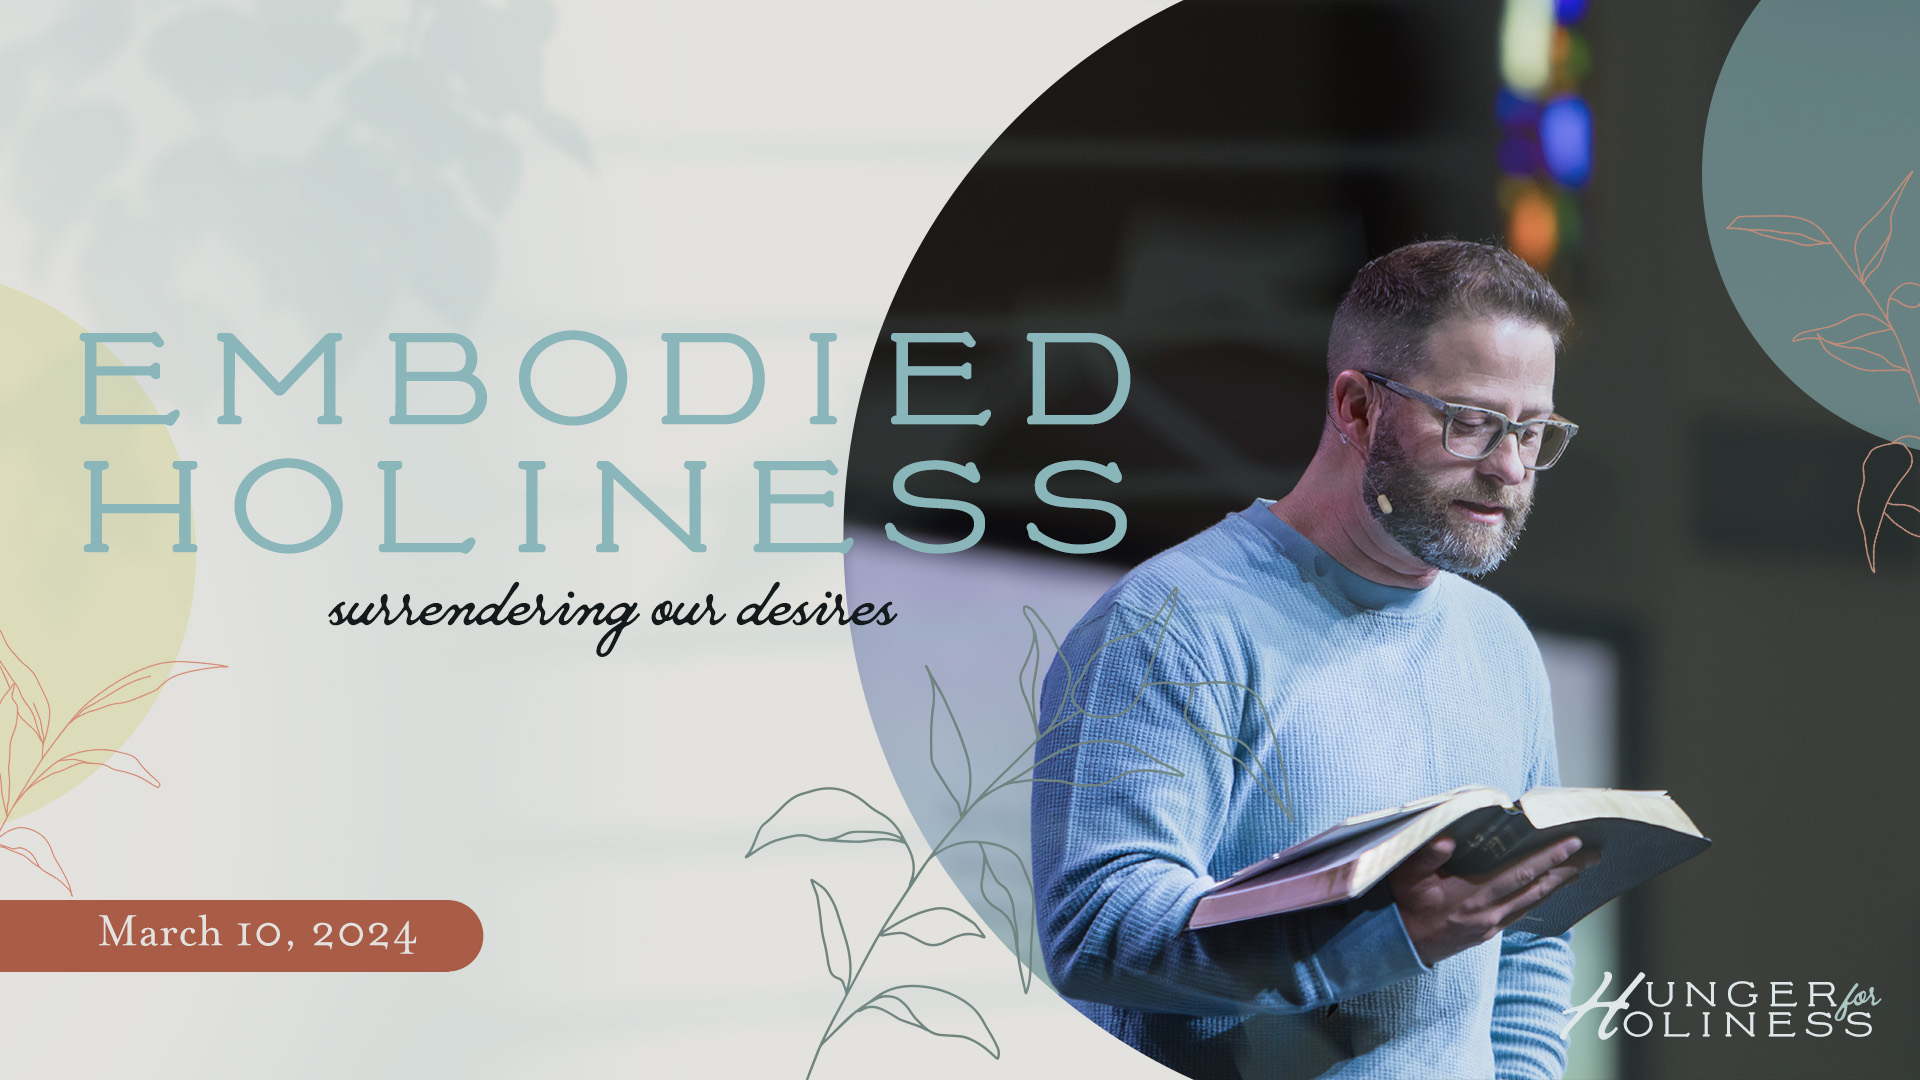 Embodied Holiness- surrendering our desires